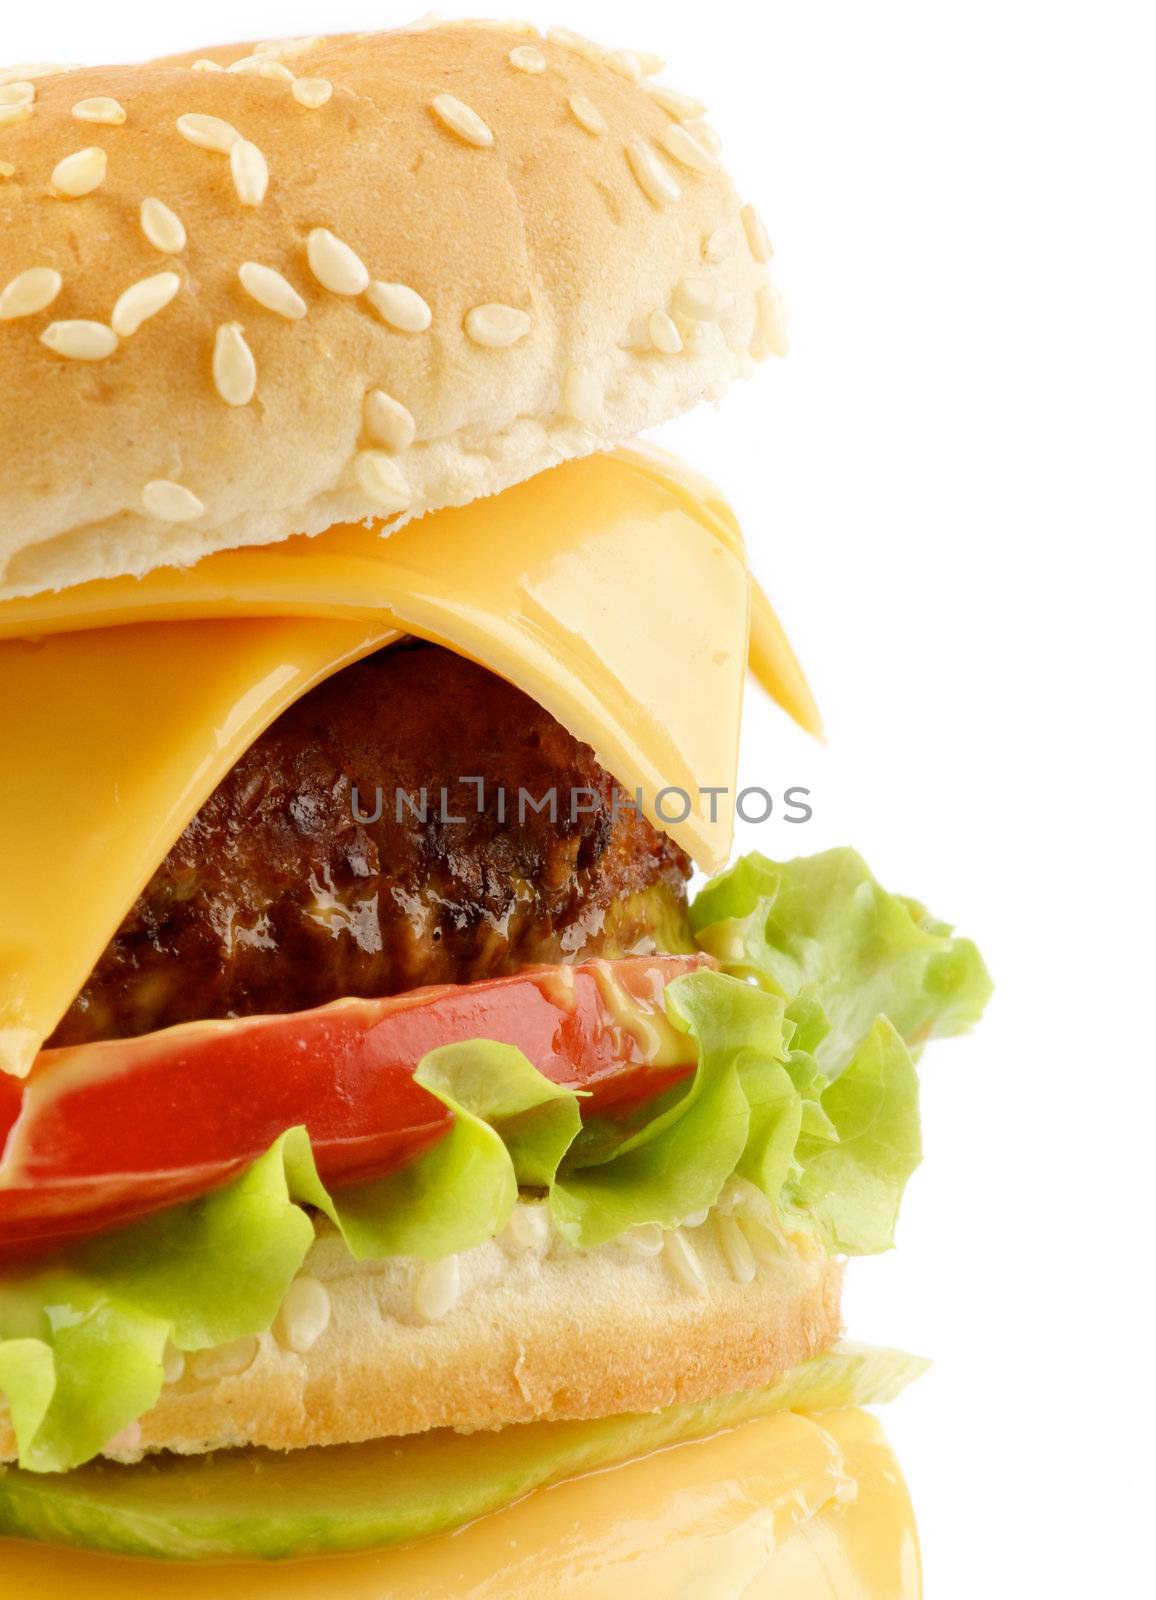 Tasty Cheeseburger with beef, tomato and letucce closeup on white background